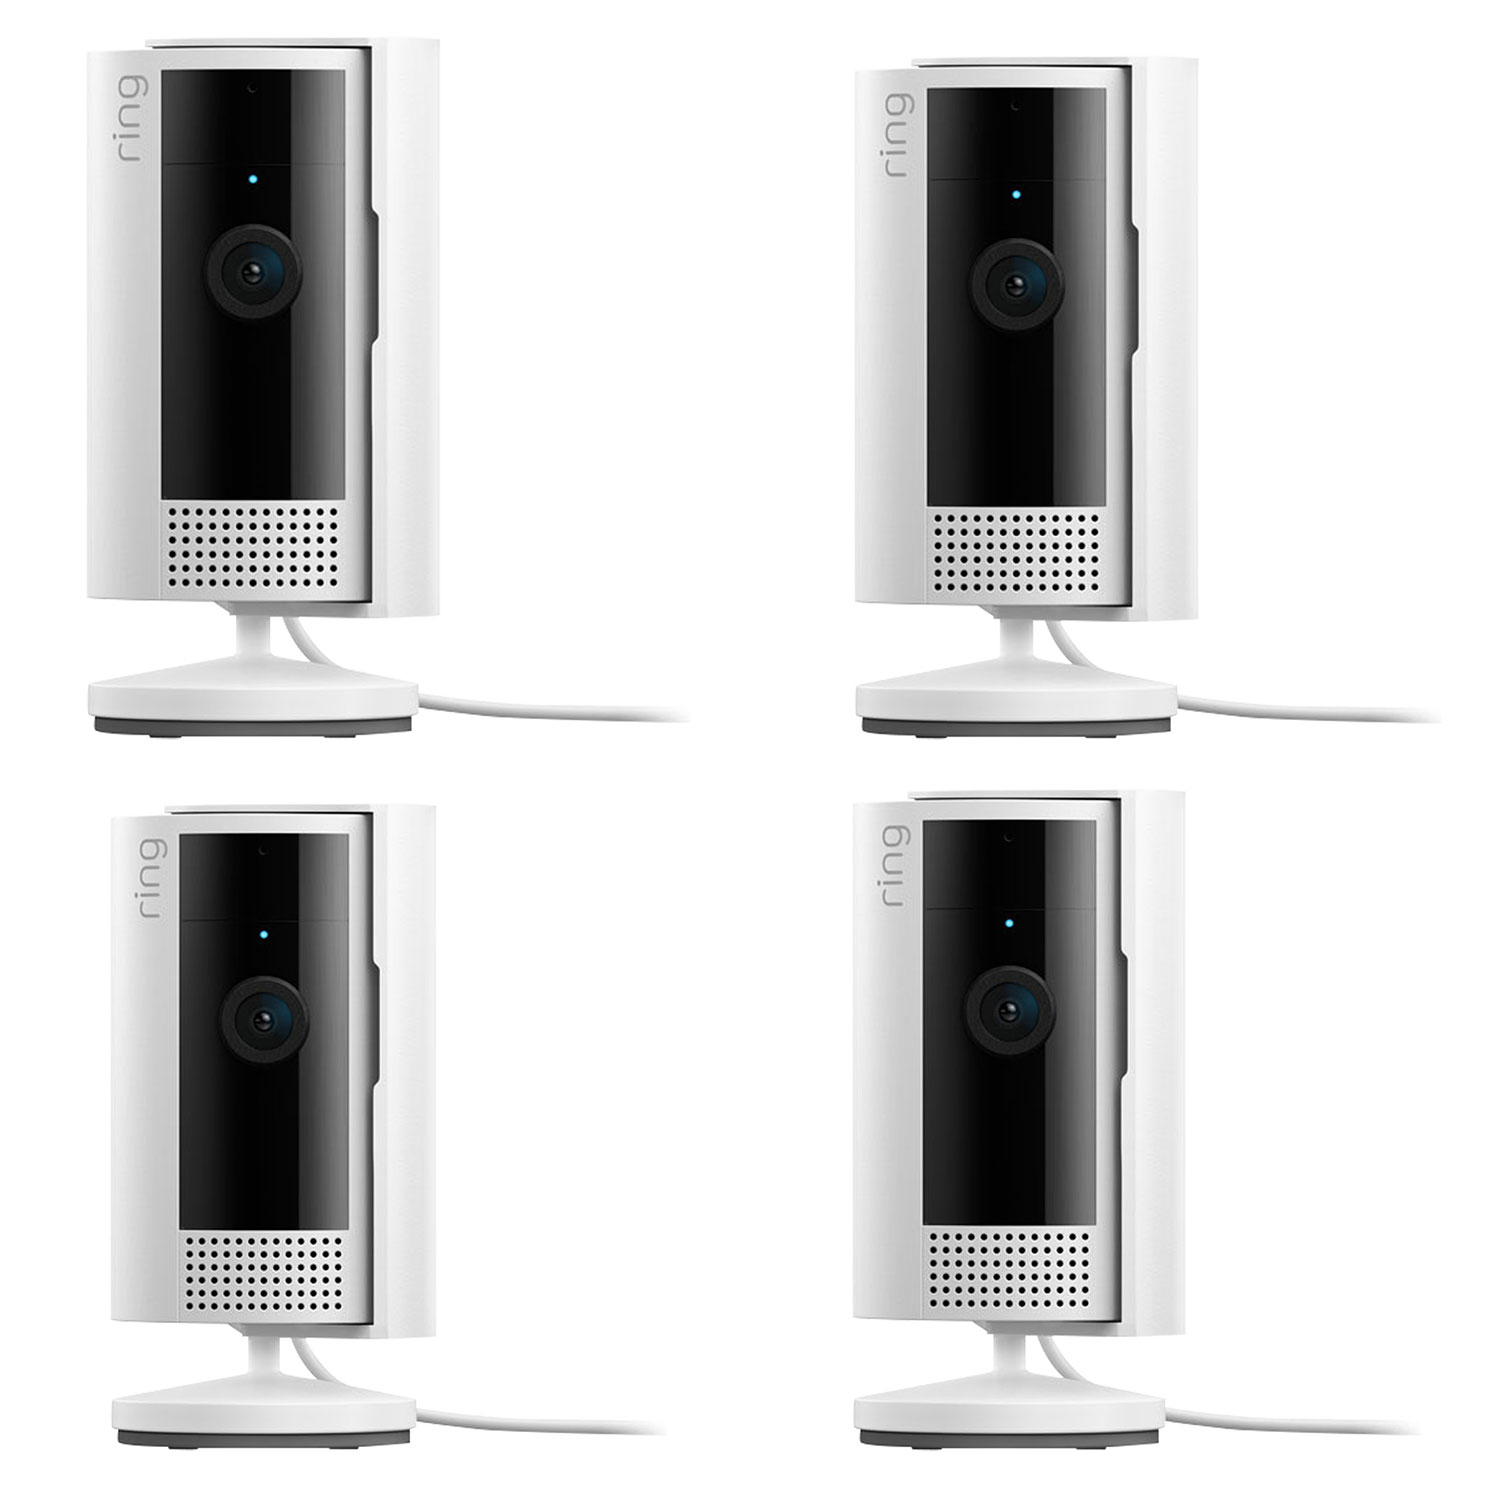 Ring Indoor Cam WiFi 1080p HD IP Camera (2nd Gen) - 4 Pack - White